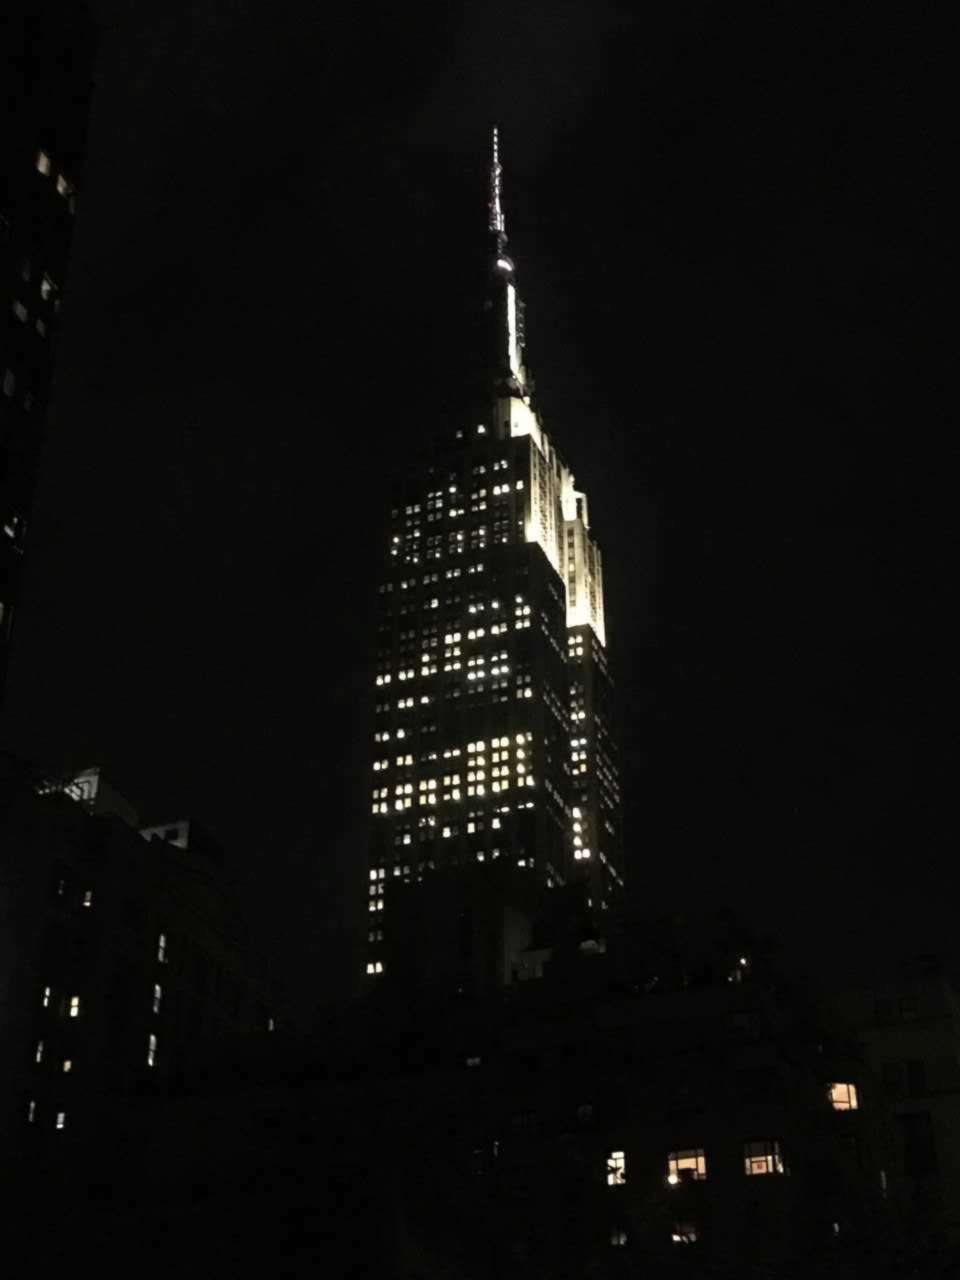 PHOTO: The Empire State Building in New York City is photographed here half-lit as a metaphor for the power that is lost when you eliminate half the population, or women and girls.